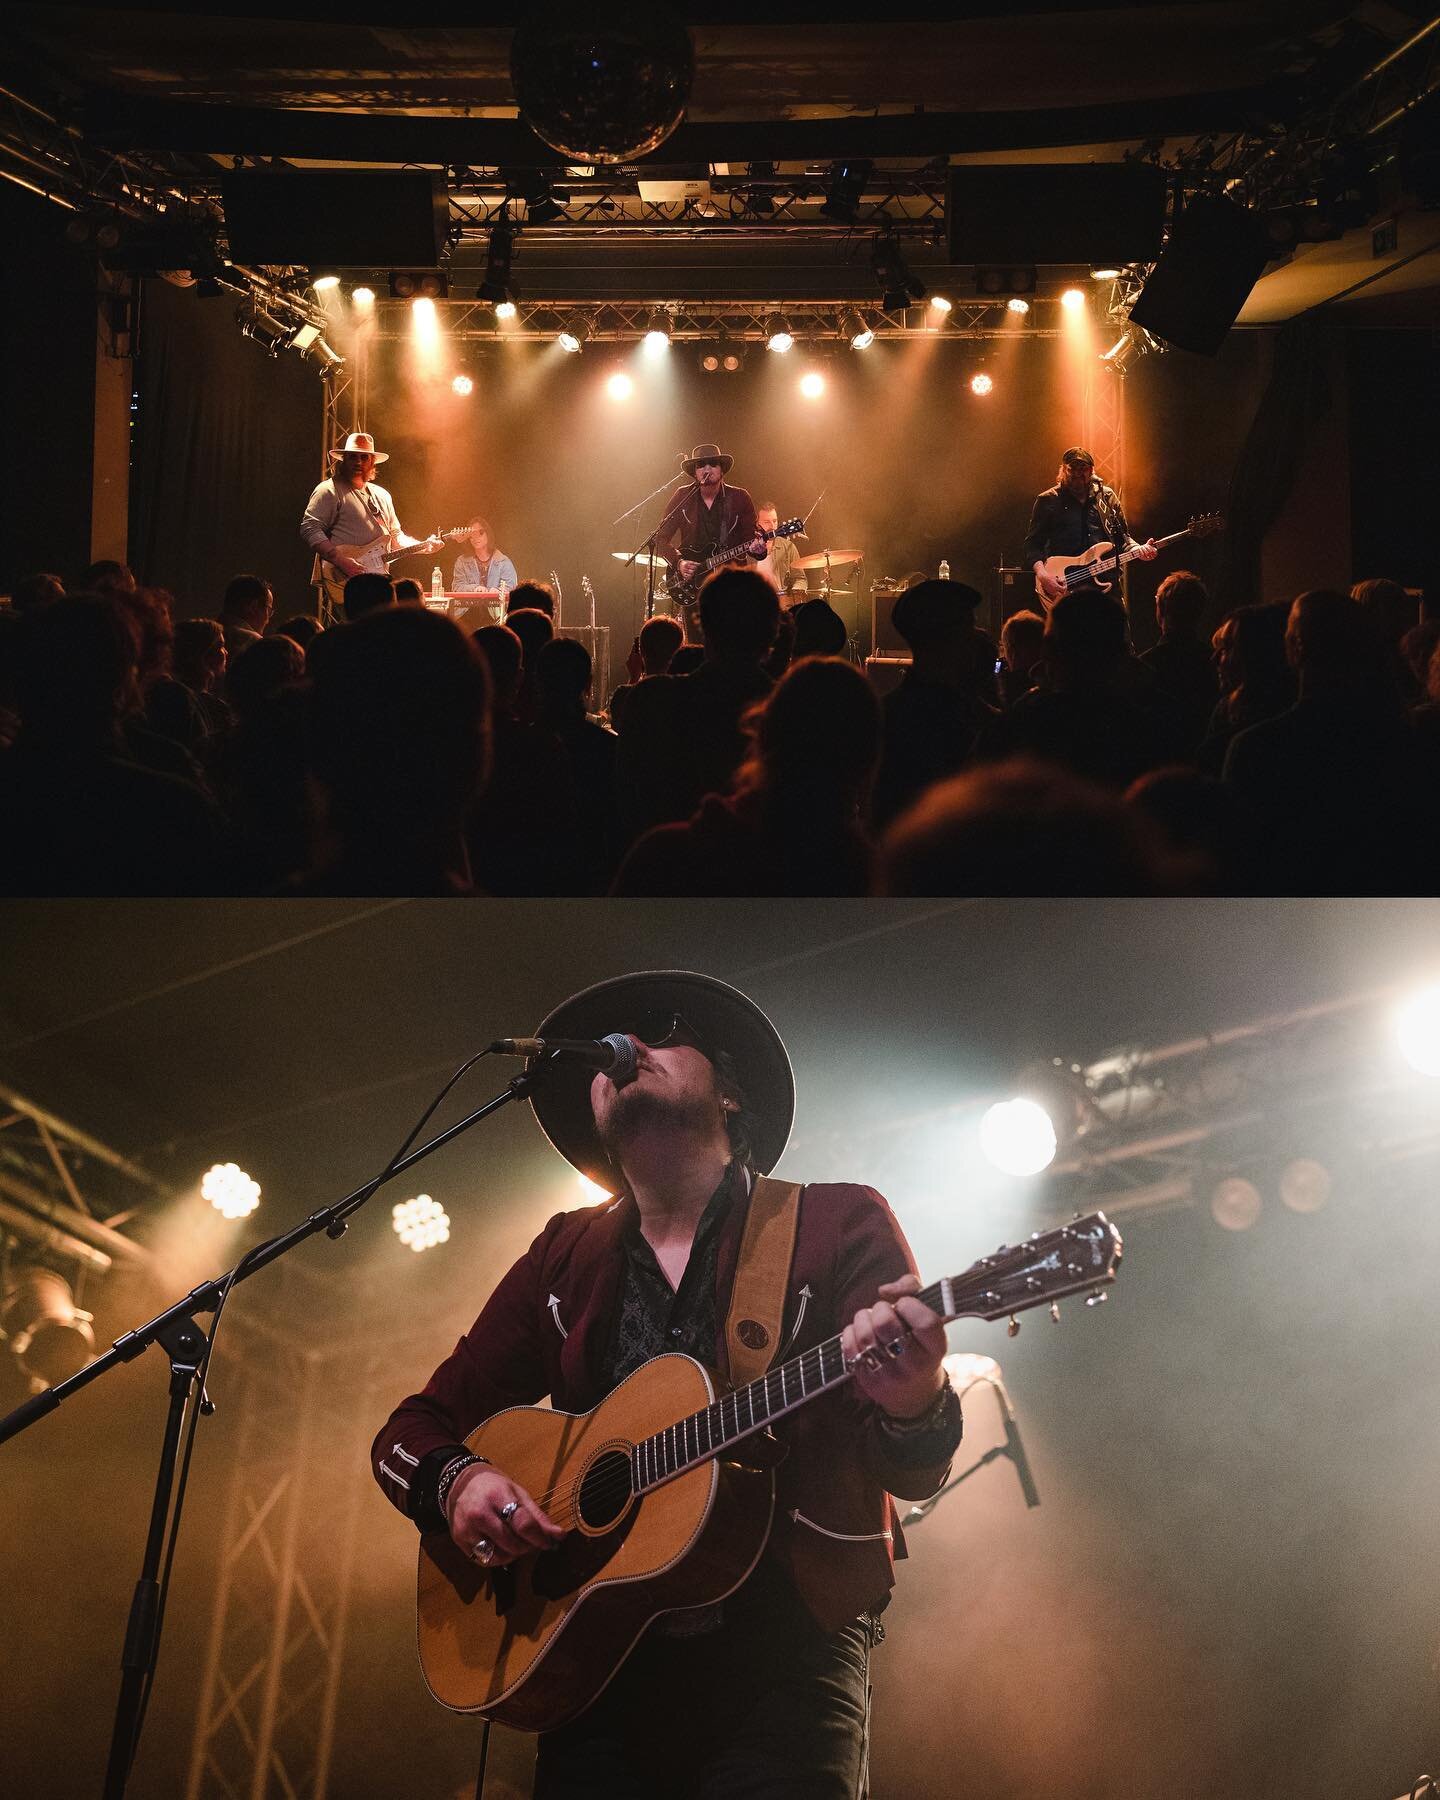 Dylan LeBlanc &amp; Jesse Roper in Berlin, Nov 27. What a show!

Such a pleasure shooting for @jesseroperofficial again. I&rsquo;ve been hooked on his sound since first discovering him in Victoria (watching a couple mins of his set from outside a win